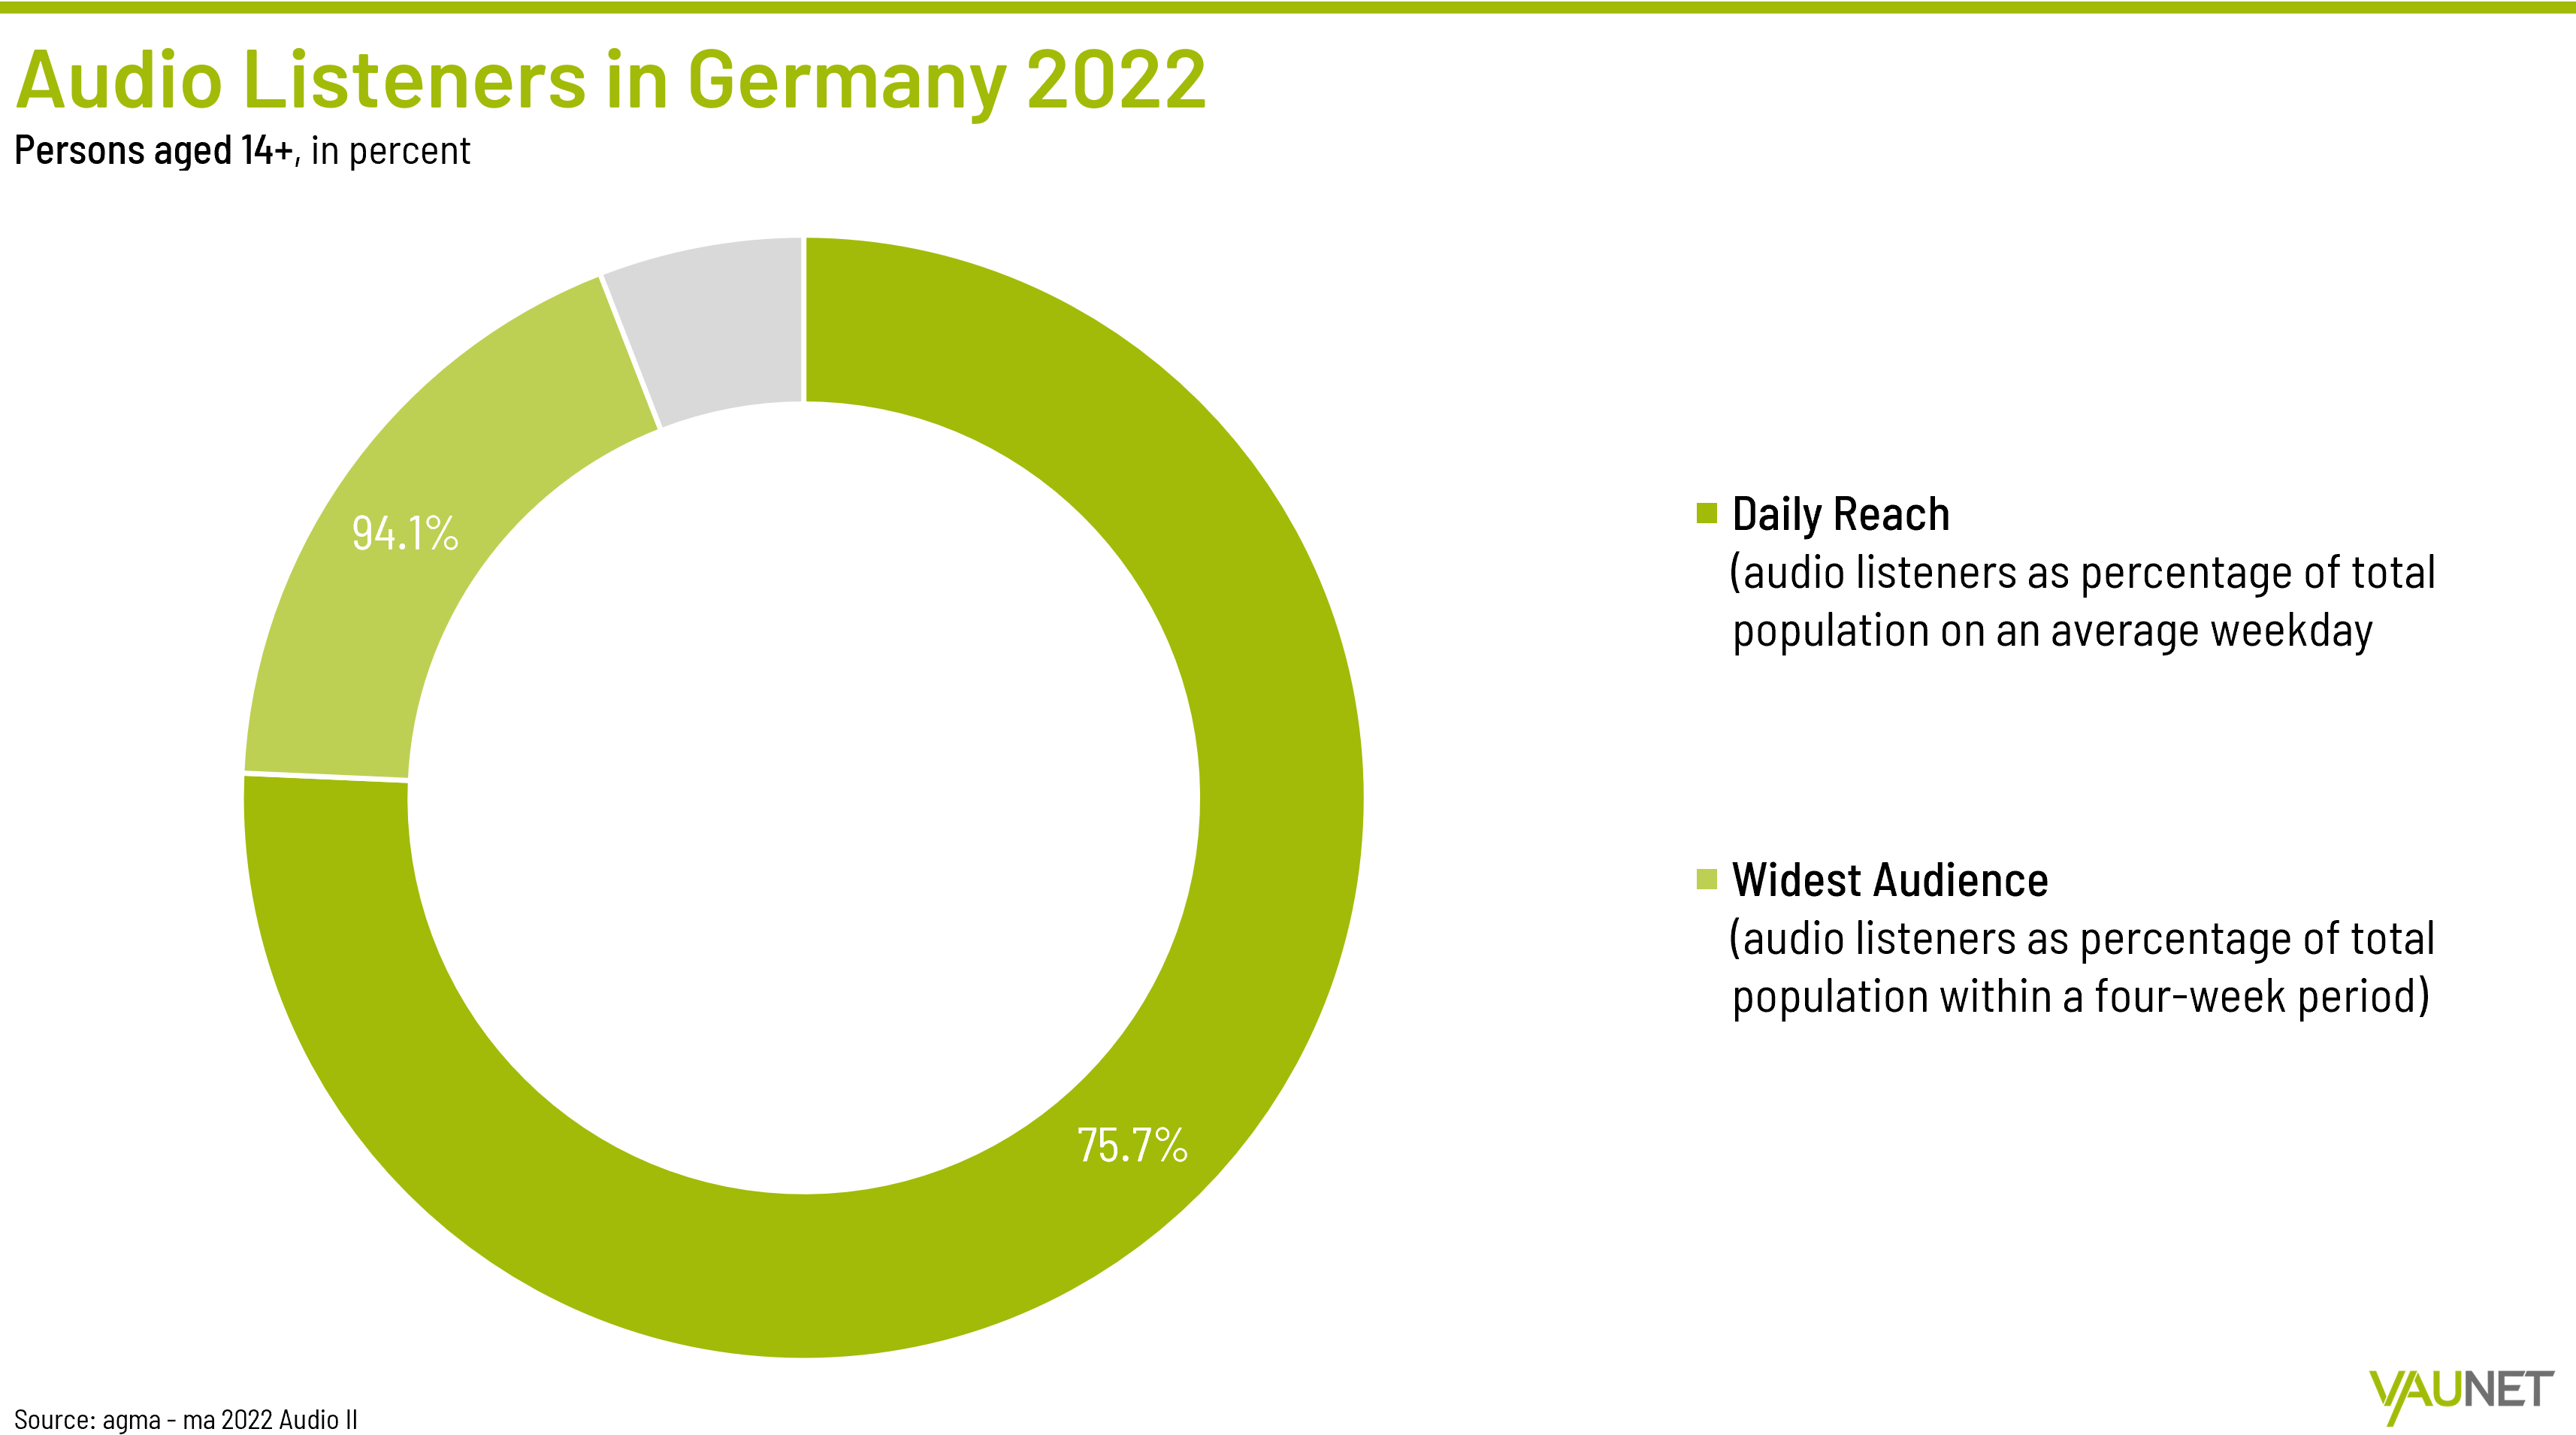 Audio listeners in Germany - 2022